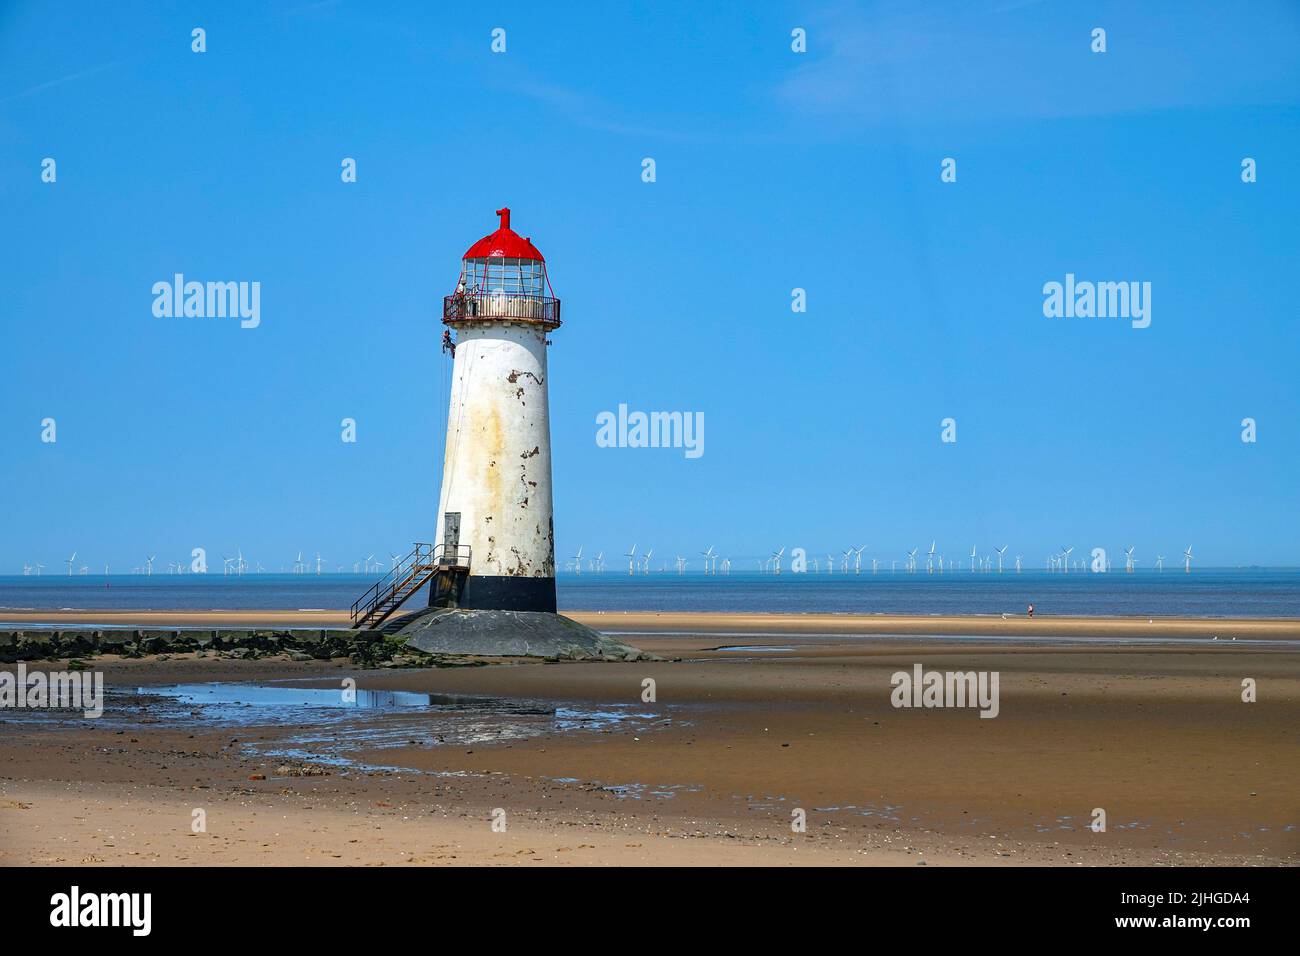 Hottest day ever in the UK at Talacre Beach, and the Point of Ayr lighthouse, Flintshire, North Wales Stock Photo